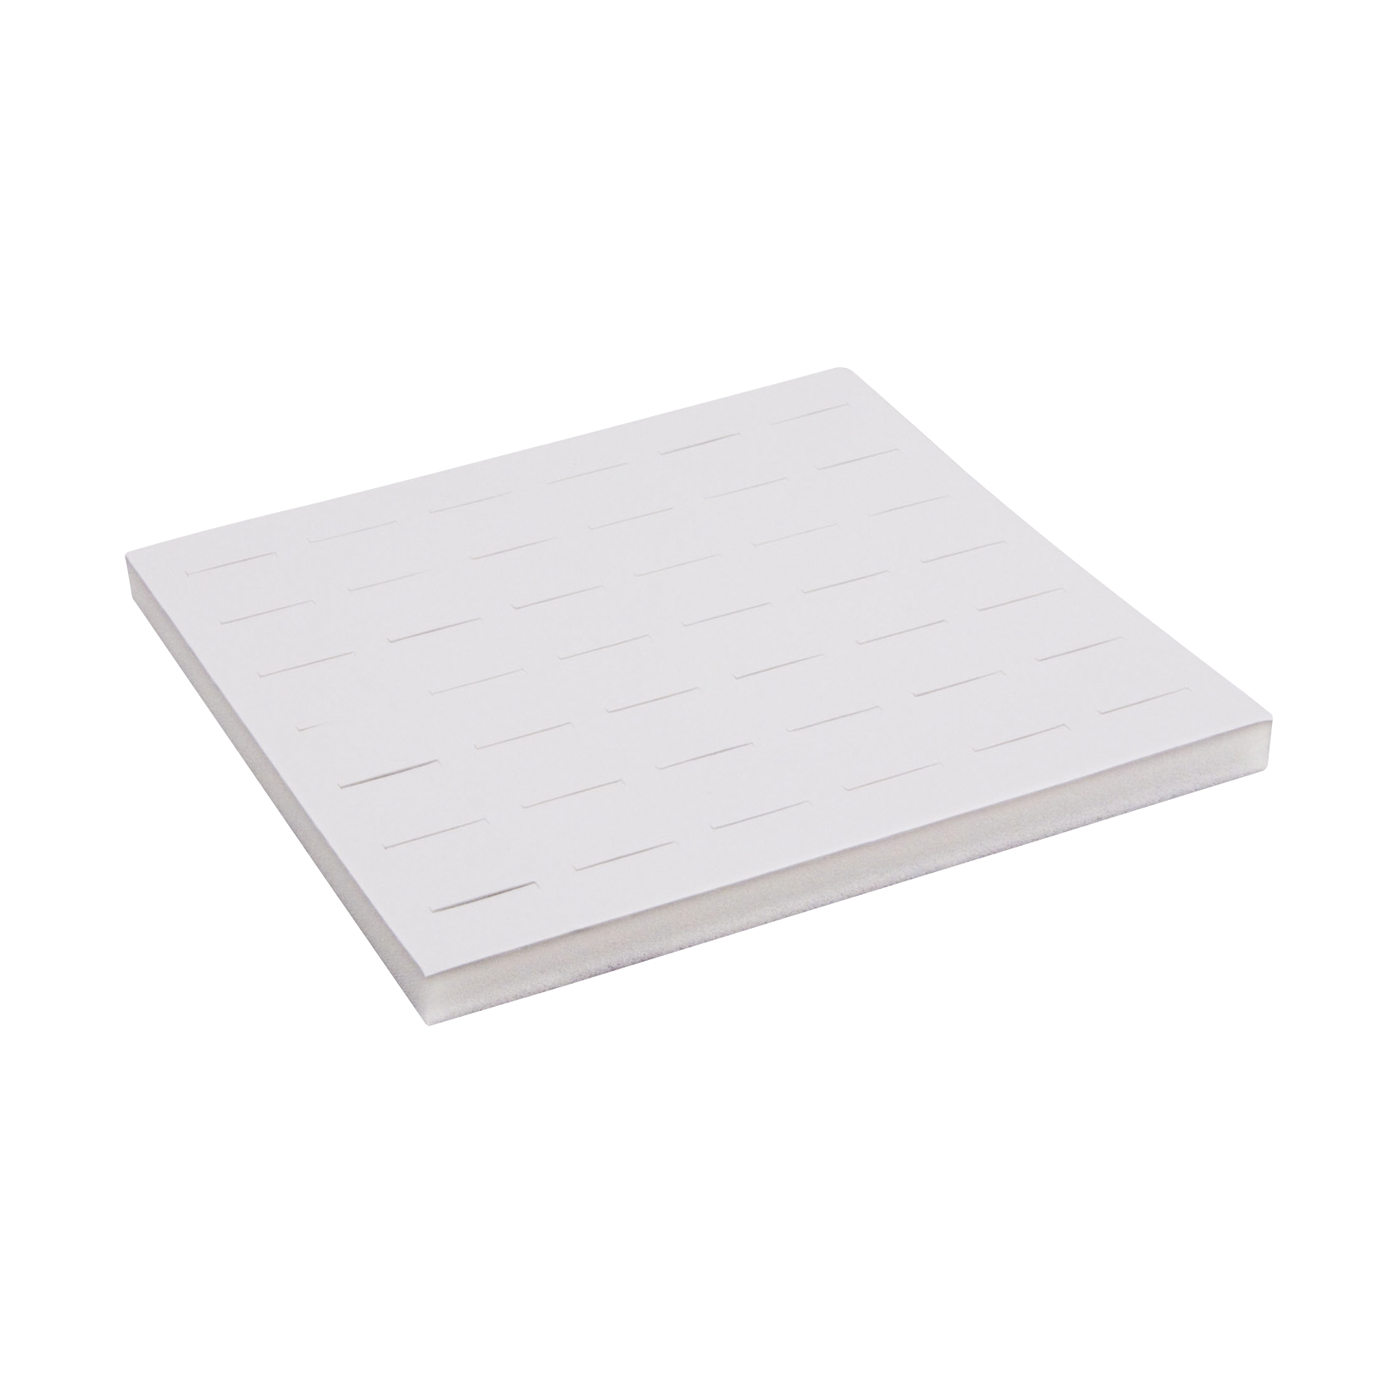 Tray System Inlay, White, for 42 Rings, 224 x 224 mm - 1 piece